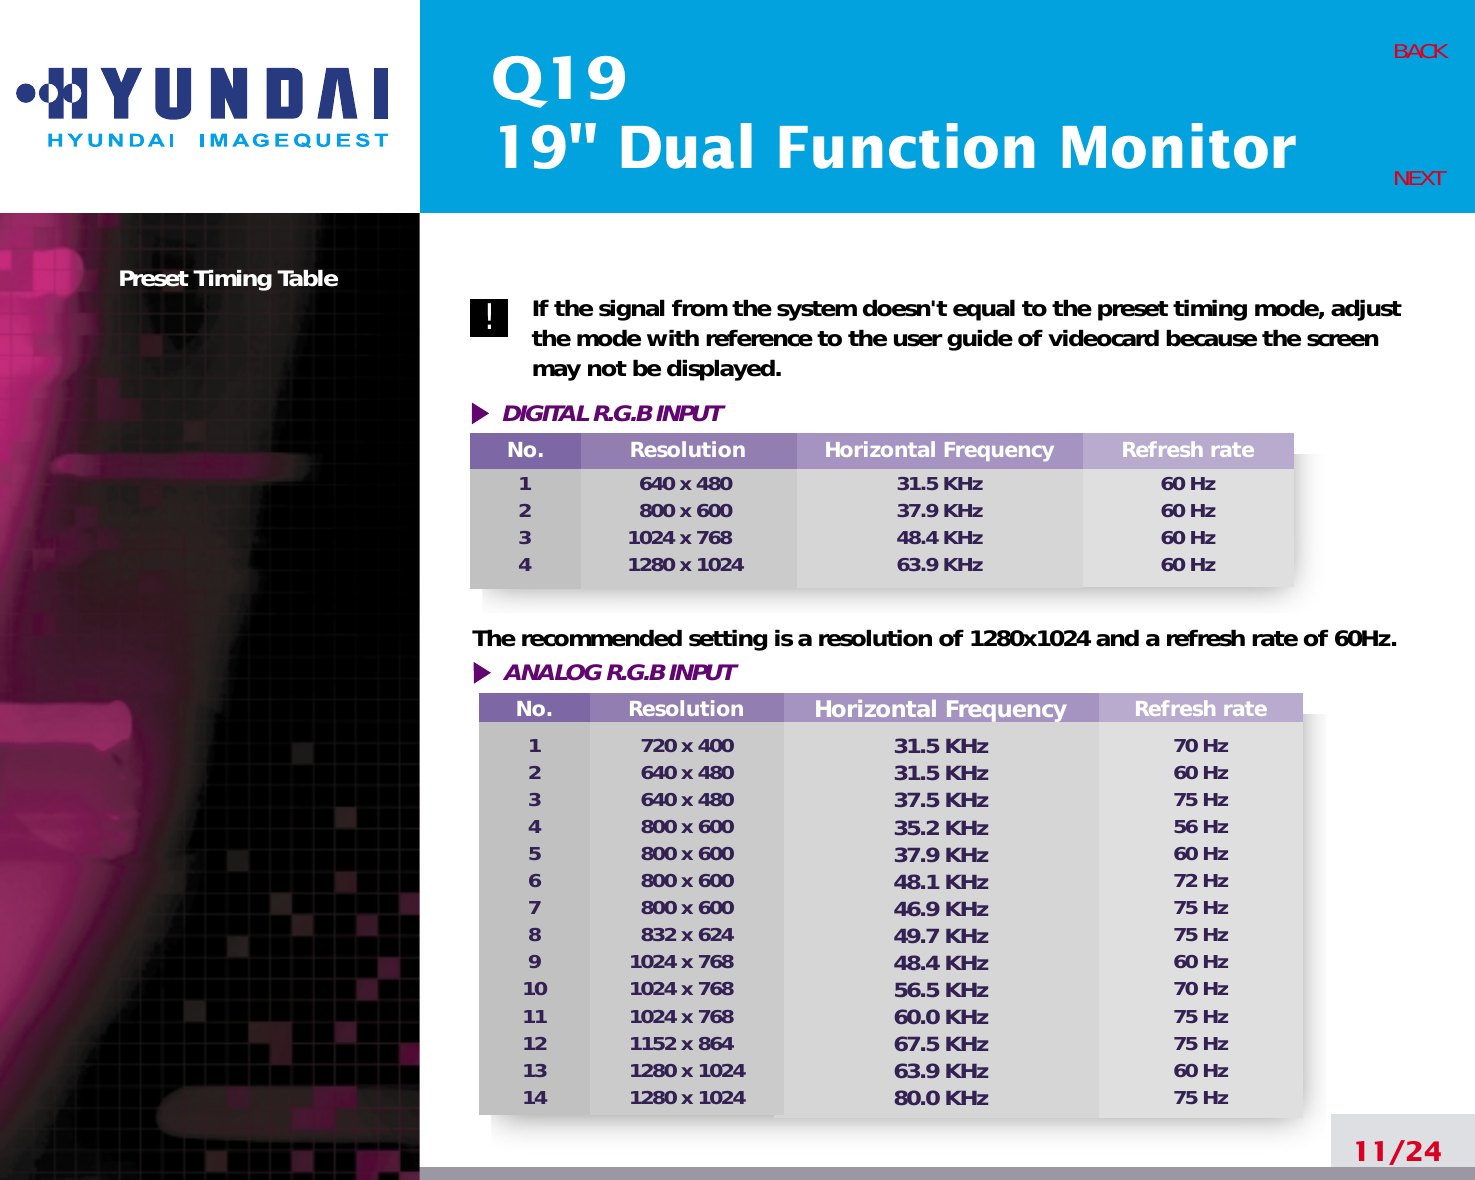 Q1919&quot; Dual Function Monitor11/24BACKNEXTPreset Timing Table If the signal from the system doesn&apos;t equal to the preset timing mode, adjustthe mode with reference to the user guide of videocard because the screenmay not be displayed.The recommended setting is a resolution of 1280x1024 and a refresh rate of 60Hz.DIGITAL R.G.B INPUTNo.1234Resolution640 x 480800 x 6001024 x 7681280 x 1024Horizontal Frequency31.5 KHz37.9 KHz48.4 KHz63.9 KHzRefresh rate60 Hz60 Hz60 Hz60 Hz!No.1234567891011121314Resolution720 x 400640 x 480640 x 480 800 x 600800 x 600800 x 600800 x 600832 x 6241024 x 7681024 x 7681024 x 7681152 x 8641280 x 10241280 x 1024Horizontal Frequency31.5 KHz31.5 KHz37.5 KHz35.2 KHz37.9 KHz48.1 KHz46.9 KHz49.7 KHz48.4 KHz56.5 KHz60.0 KHz67.5 KHz63.9 KHz80.0 KHzRefresh rate70 Hz60 Hz75 Hz56 Hz60 Hz72 Hz75 Hz75 Hz60 Hz70 Hz75 Hz75 Hz60 Hz75 HzANALOG R.G.B INPUT 